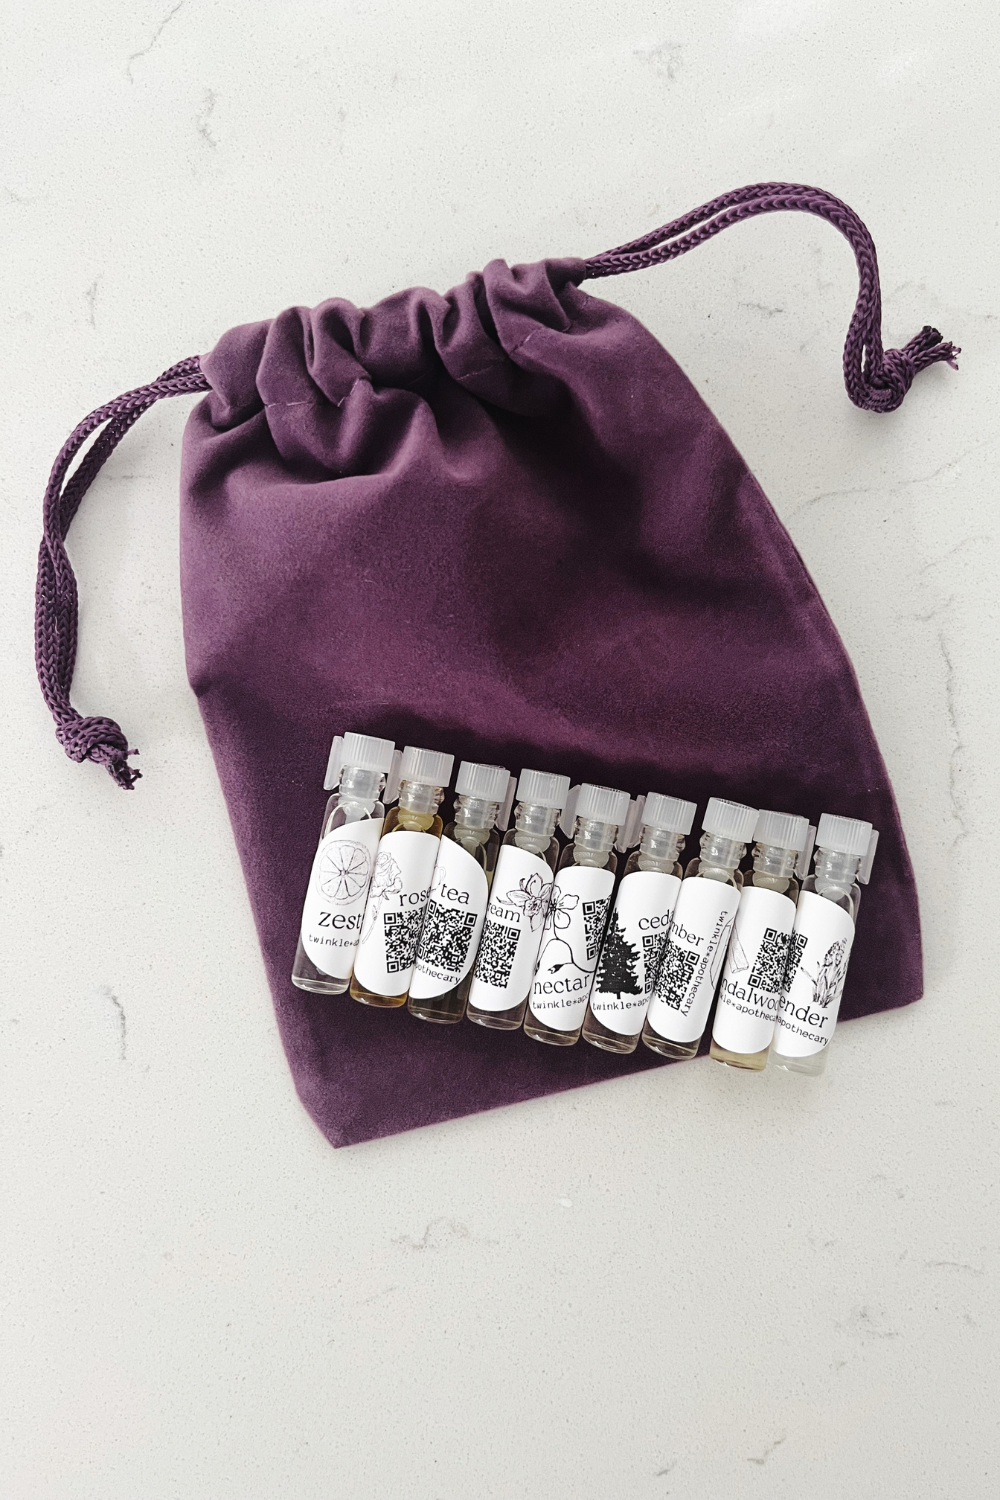 twinkle apothecary perfume samples